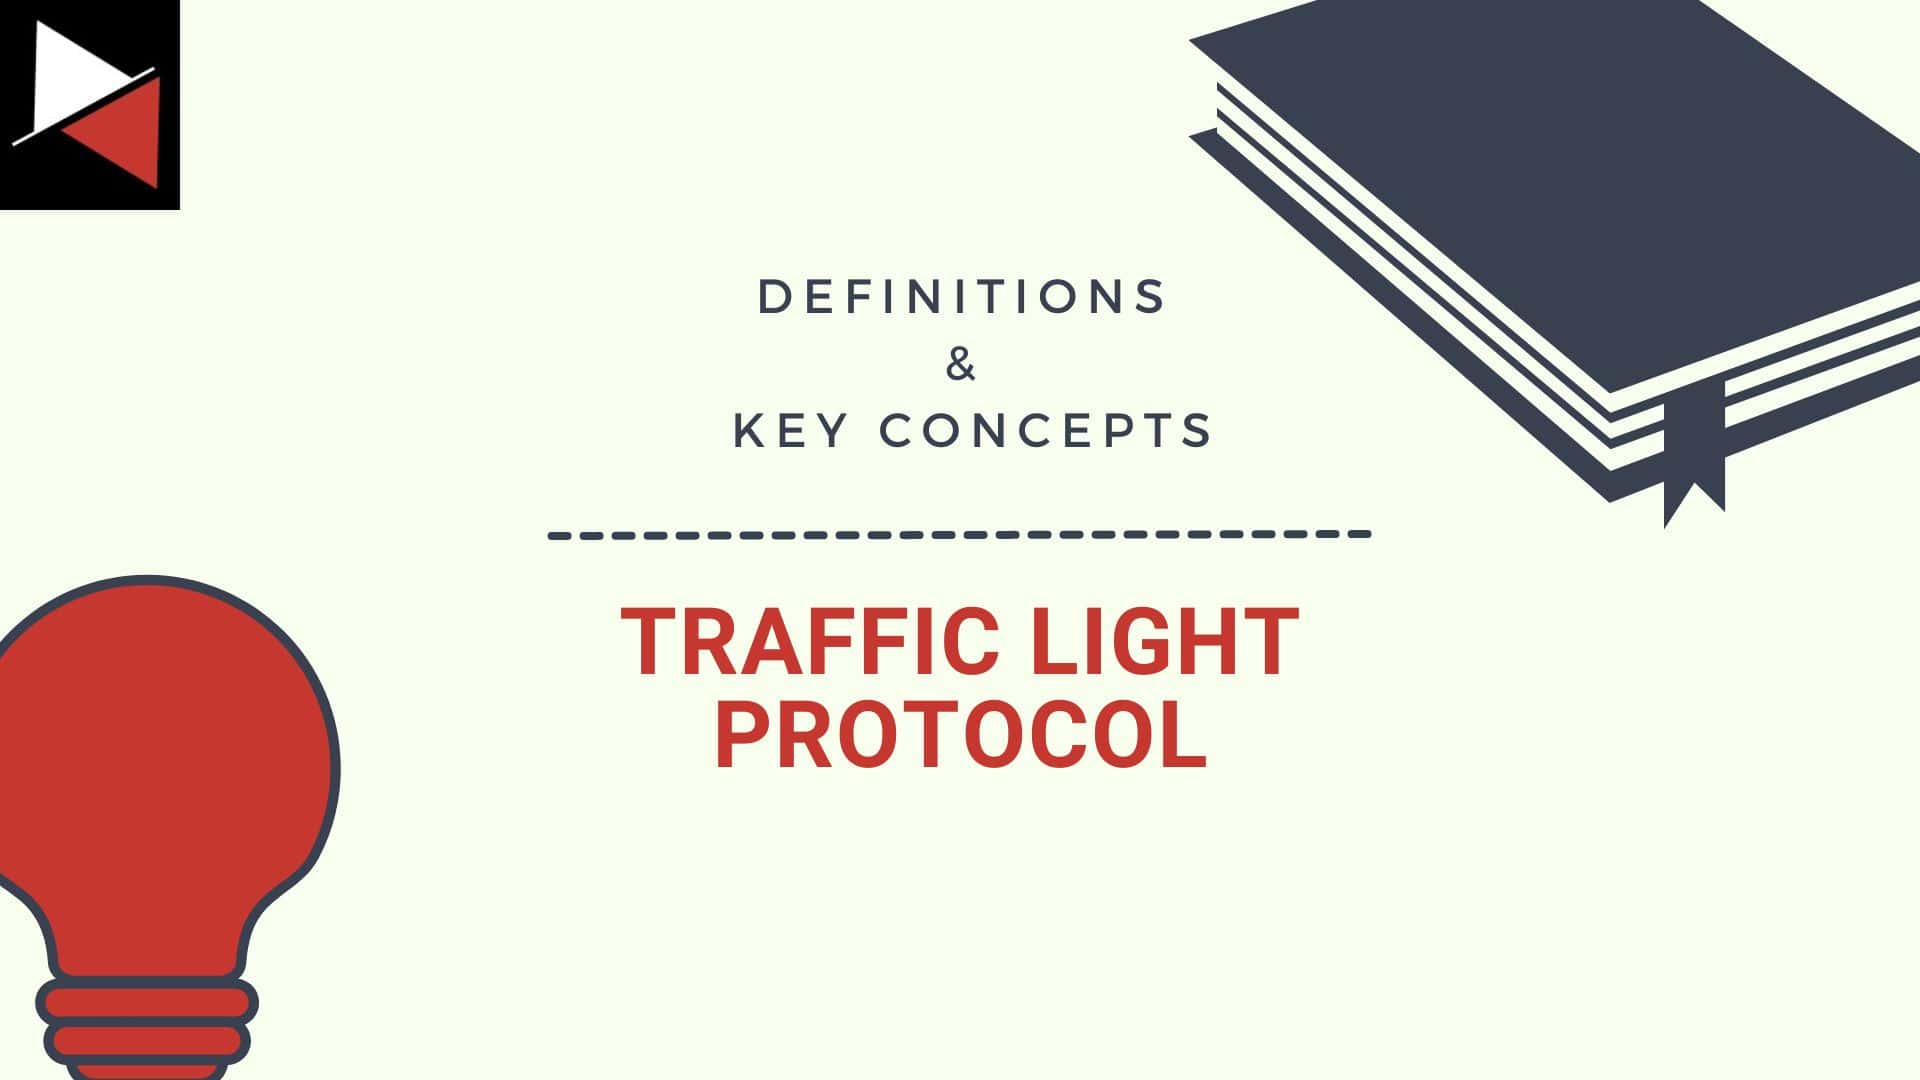 The Traffic Light Protocol: How to Classify Cyber Threat Intelligence